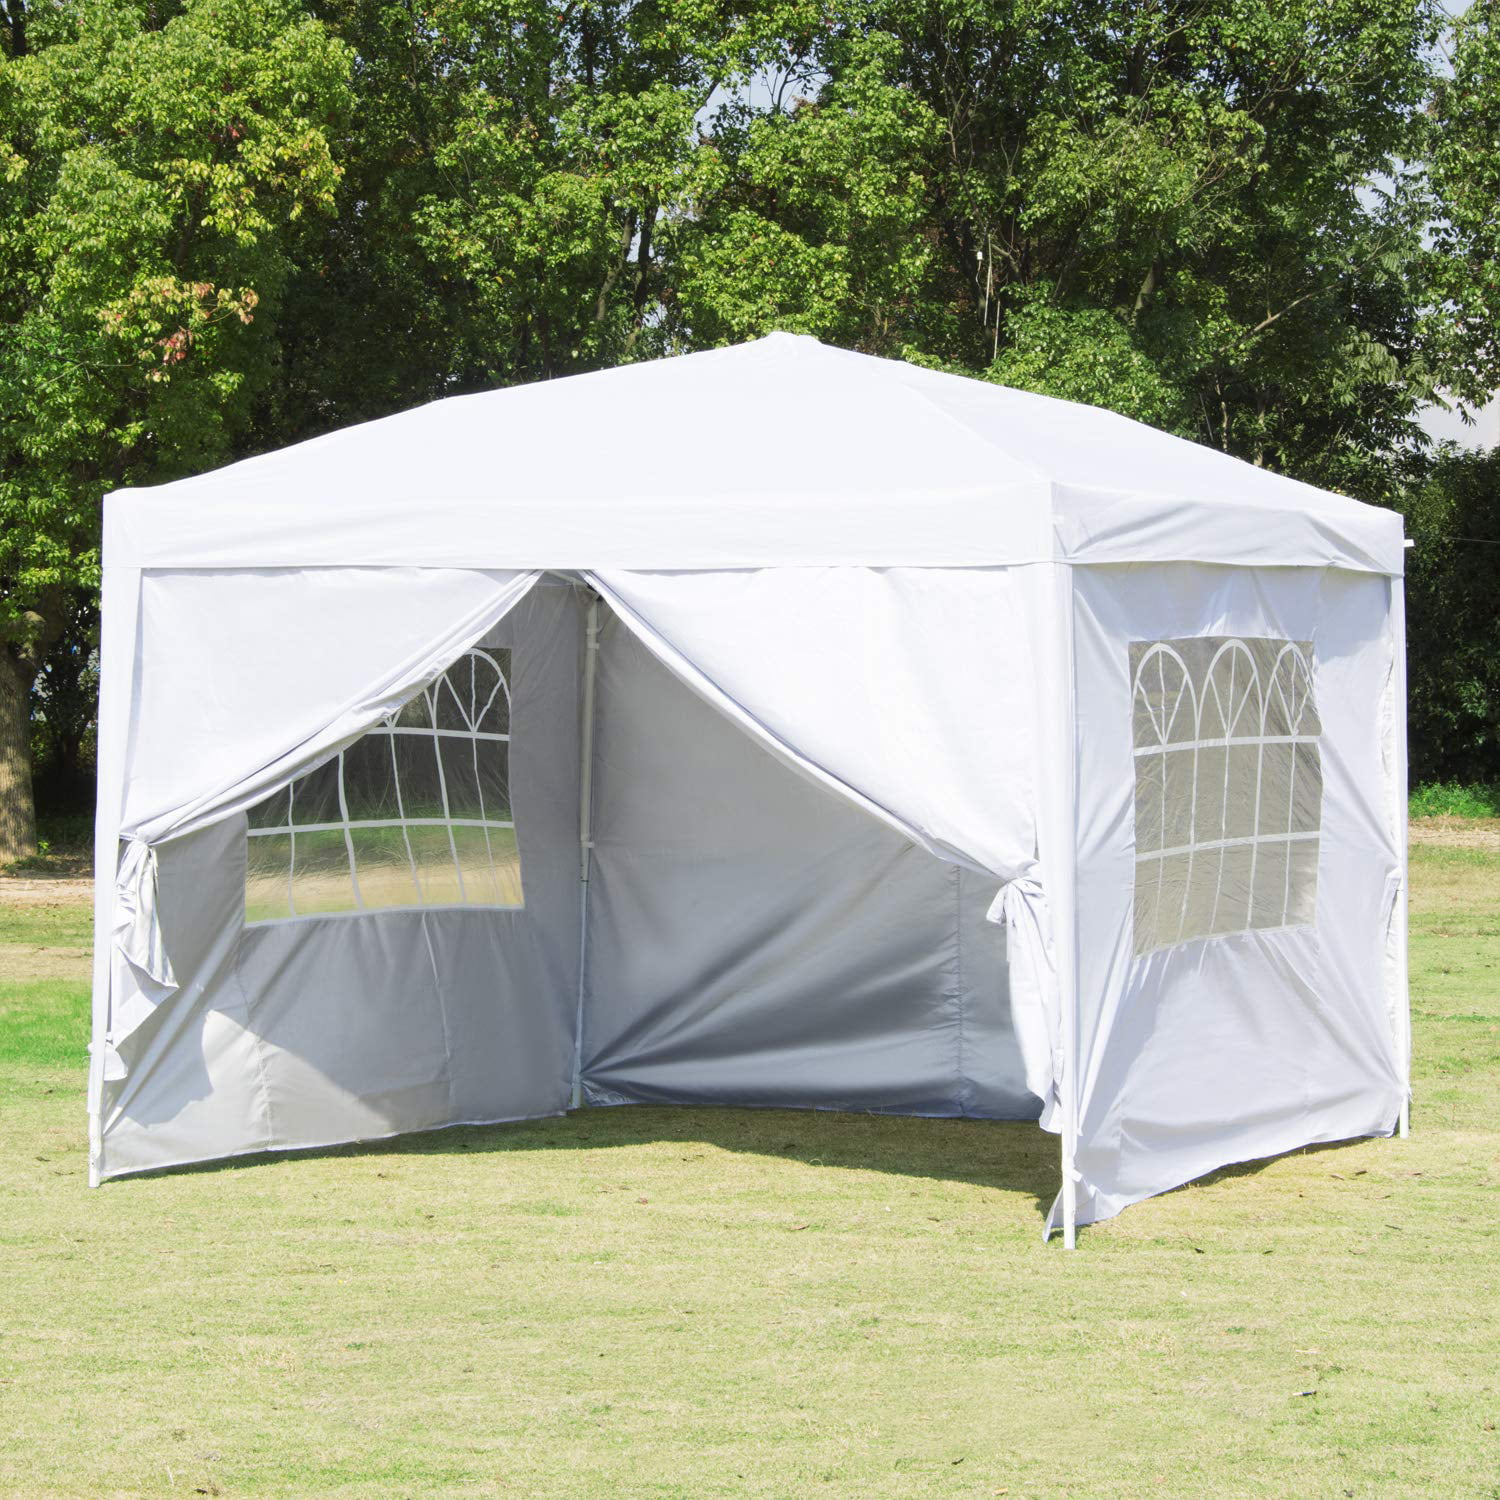 Outdoor Party Tent, 10' x 10' Patio Gazebo Tent with 4 SideWalls ...
